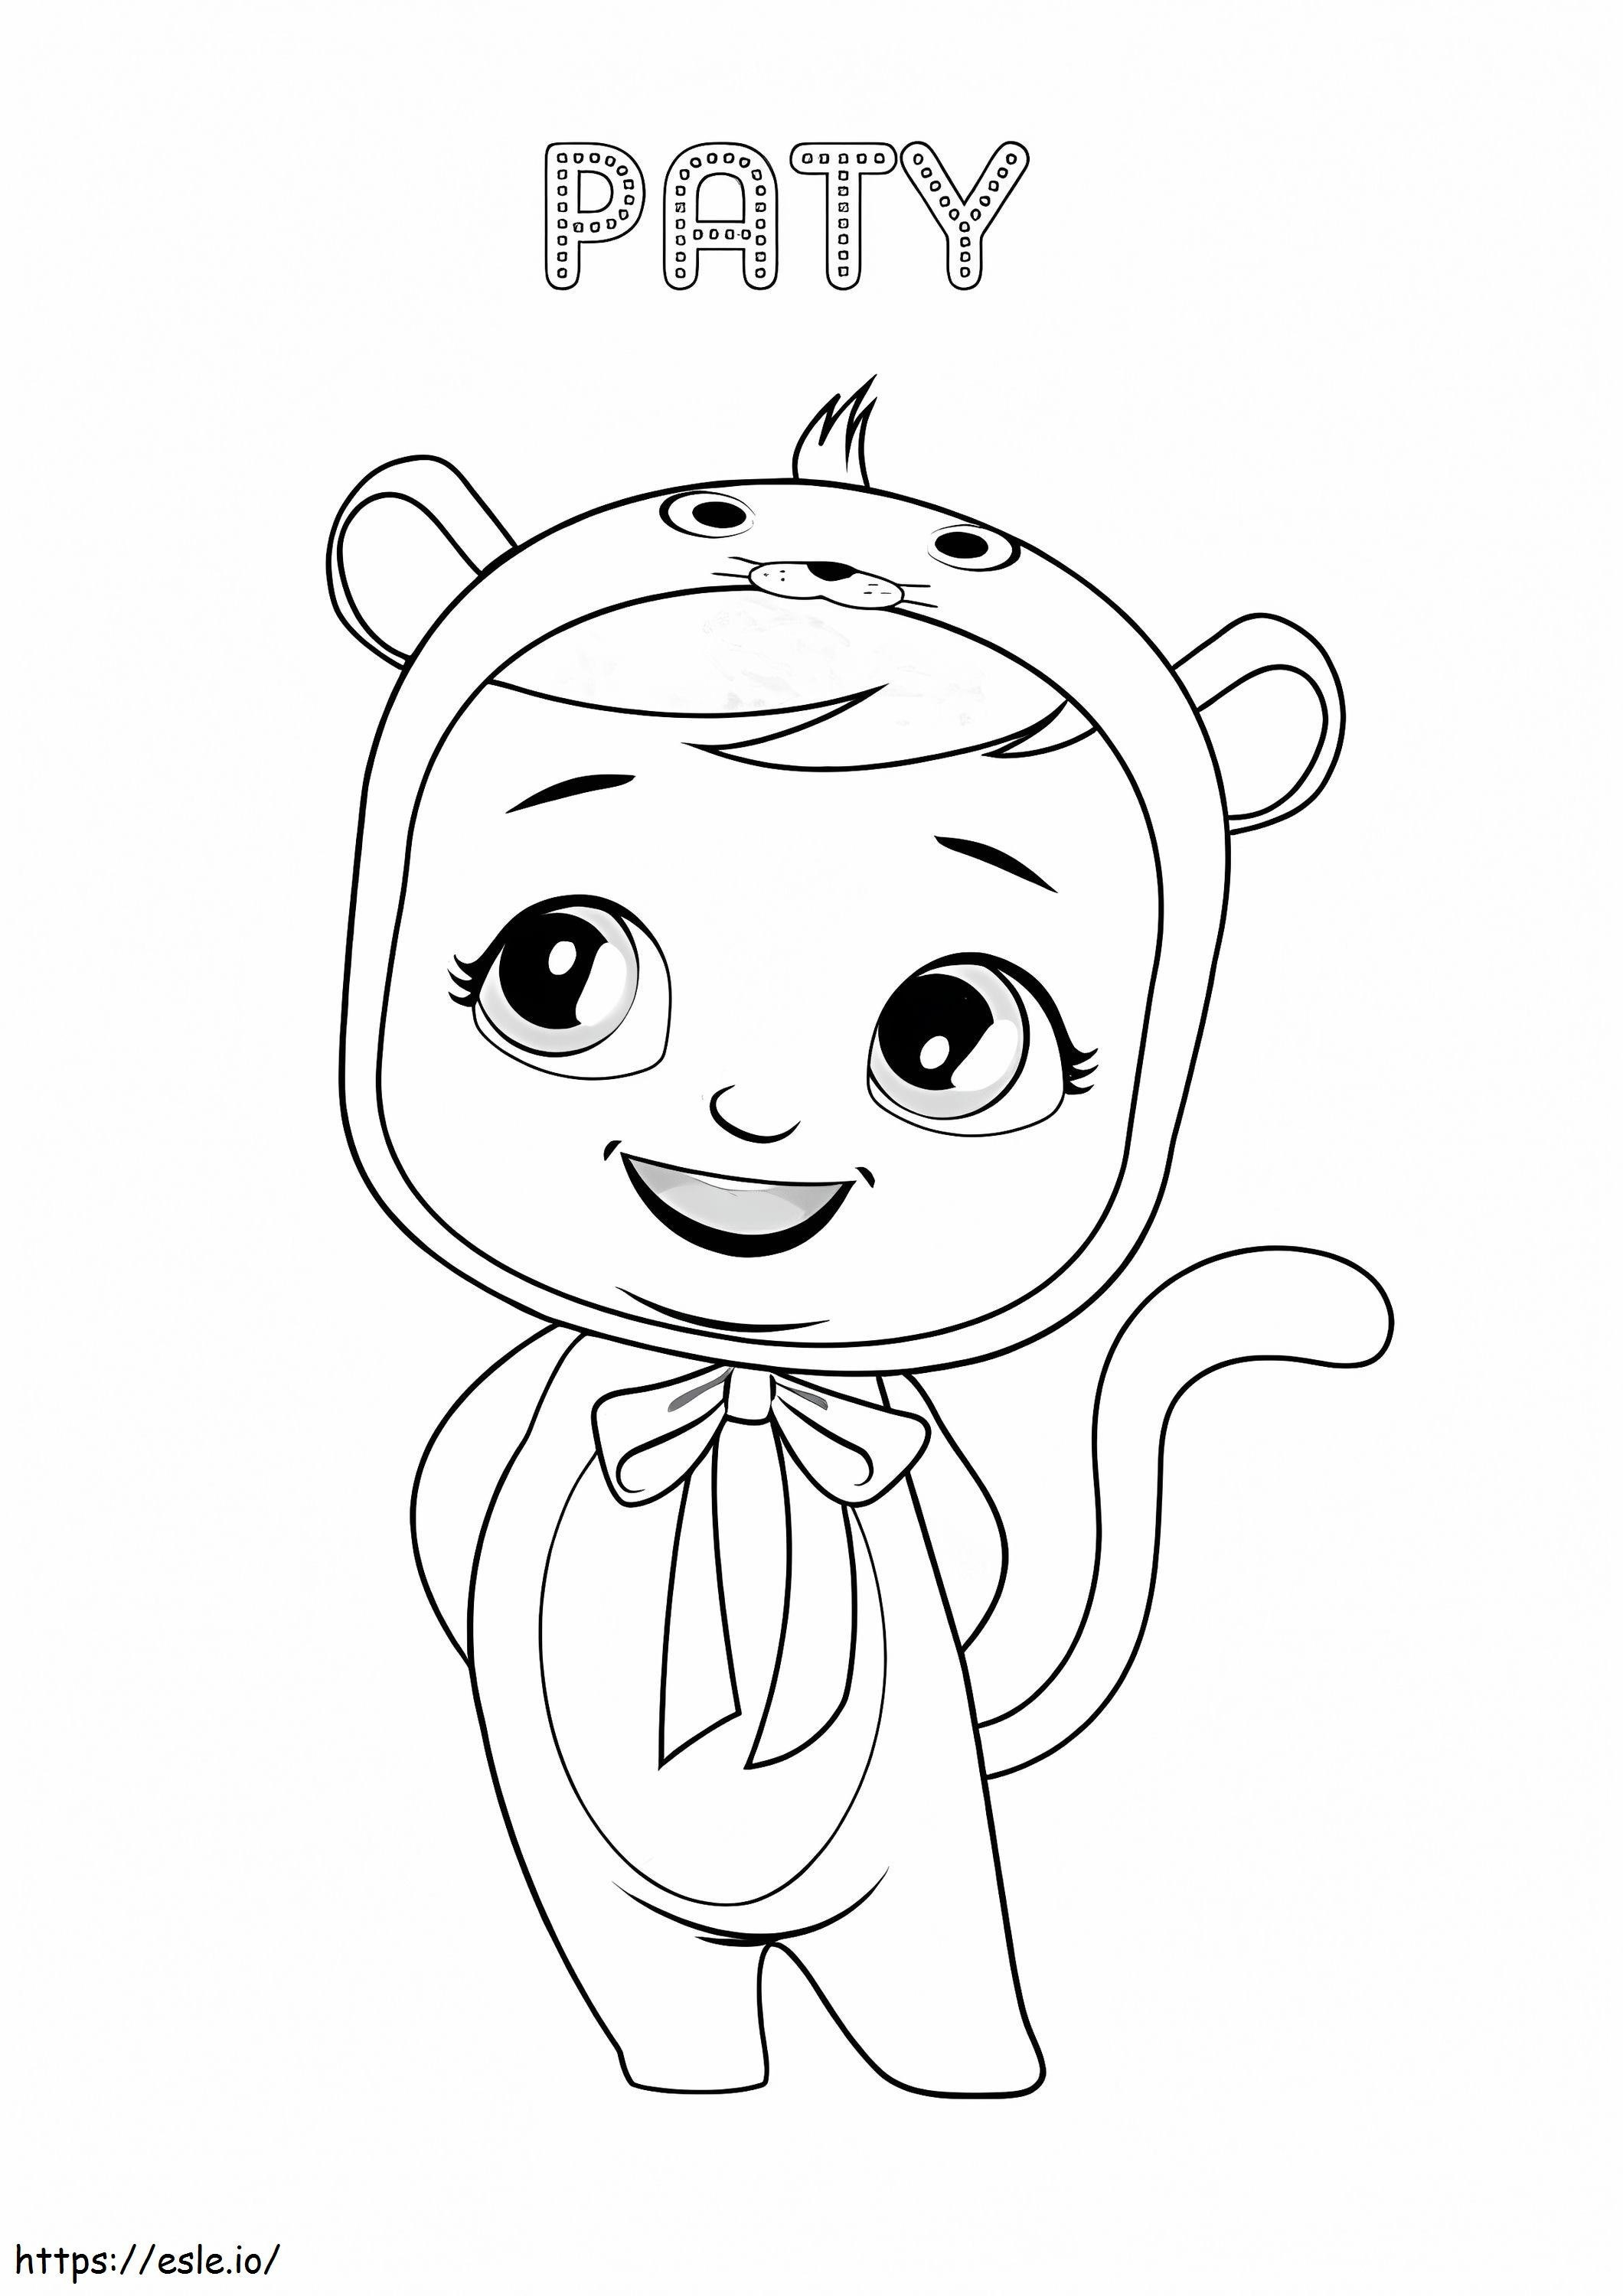 Paty Cry Babies coloring page